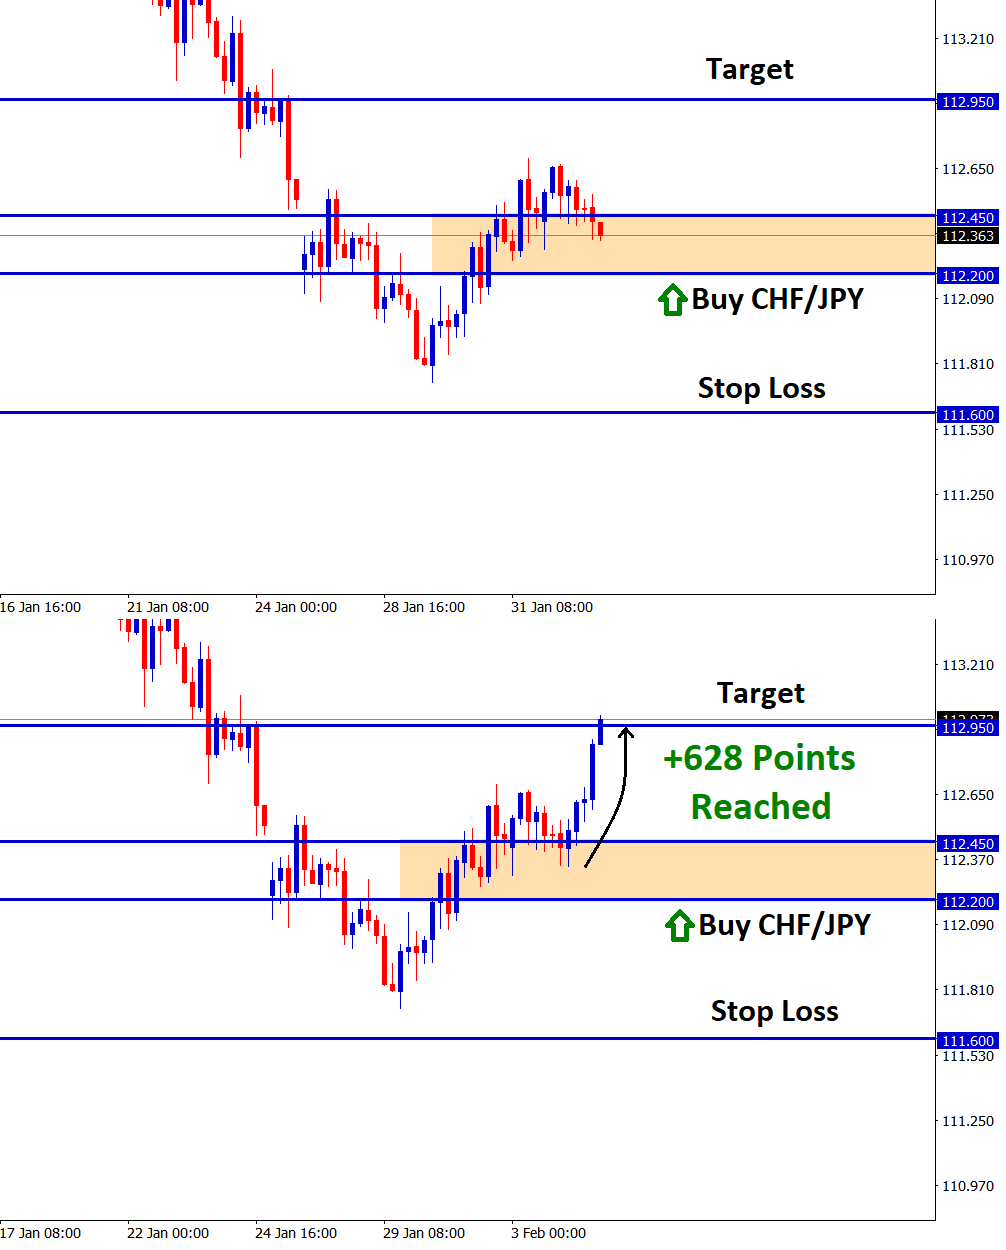 chf jpy touched the take profit